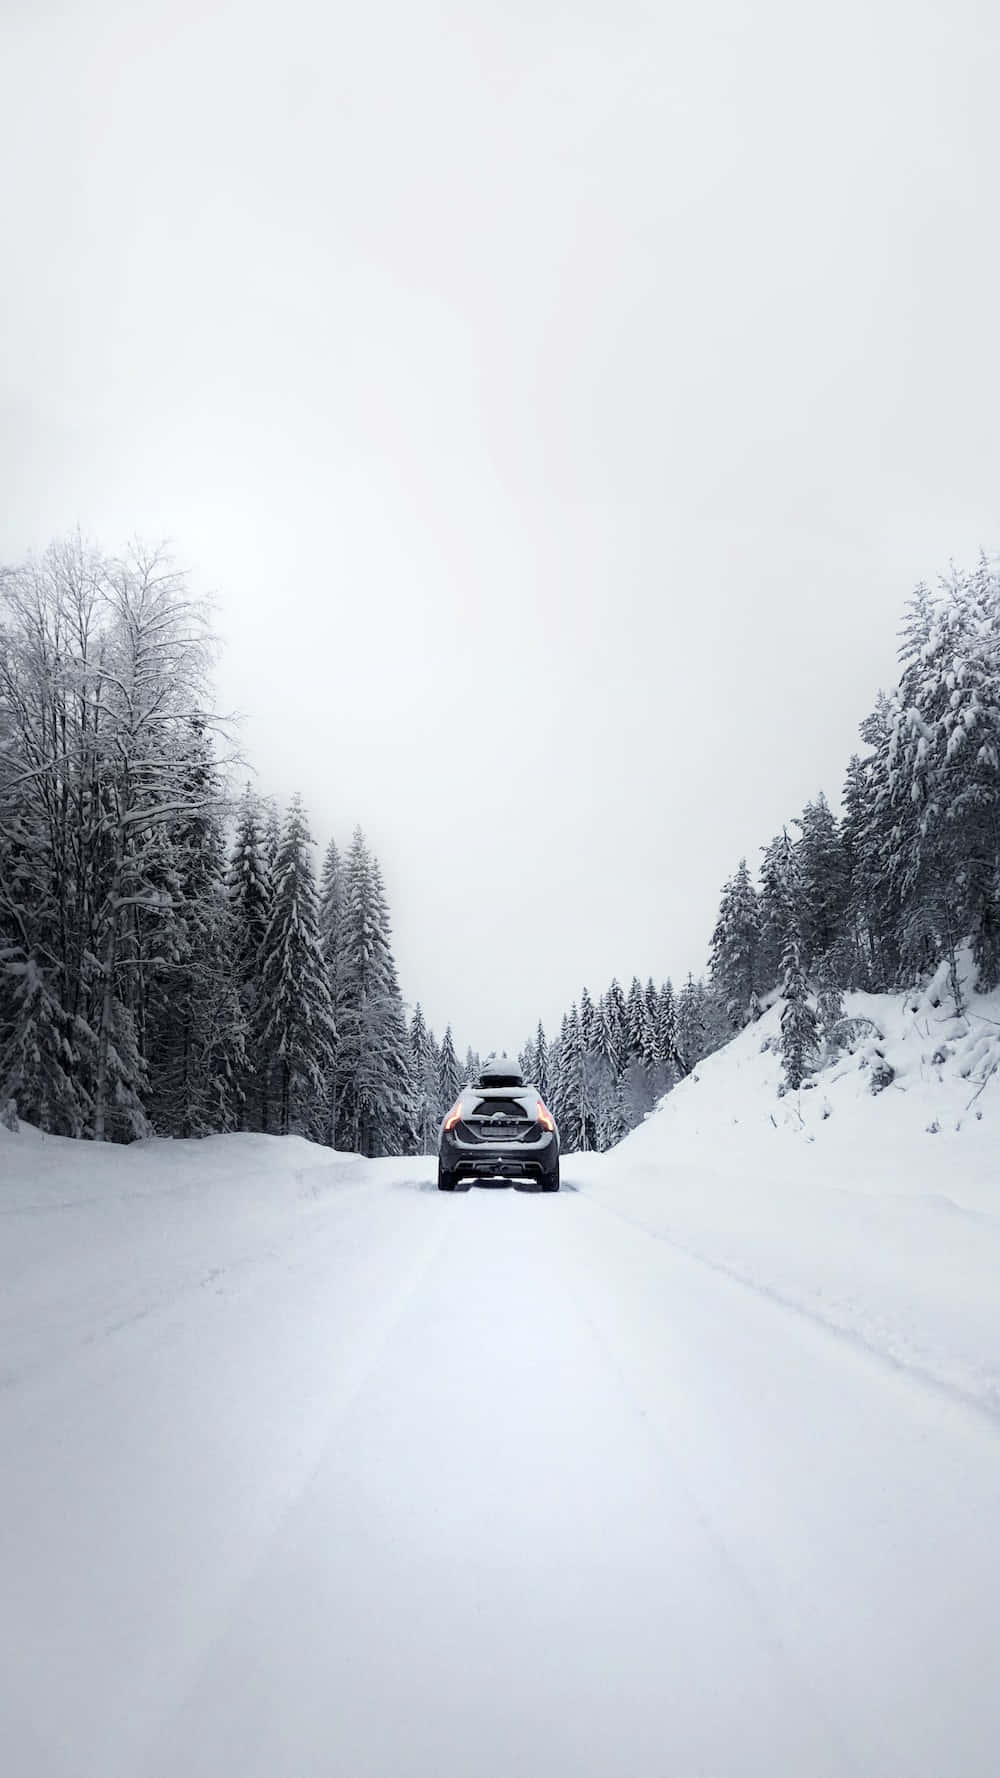 Snow-covered road amidst a serene winter landscape Wallpaper